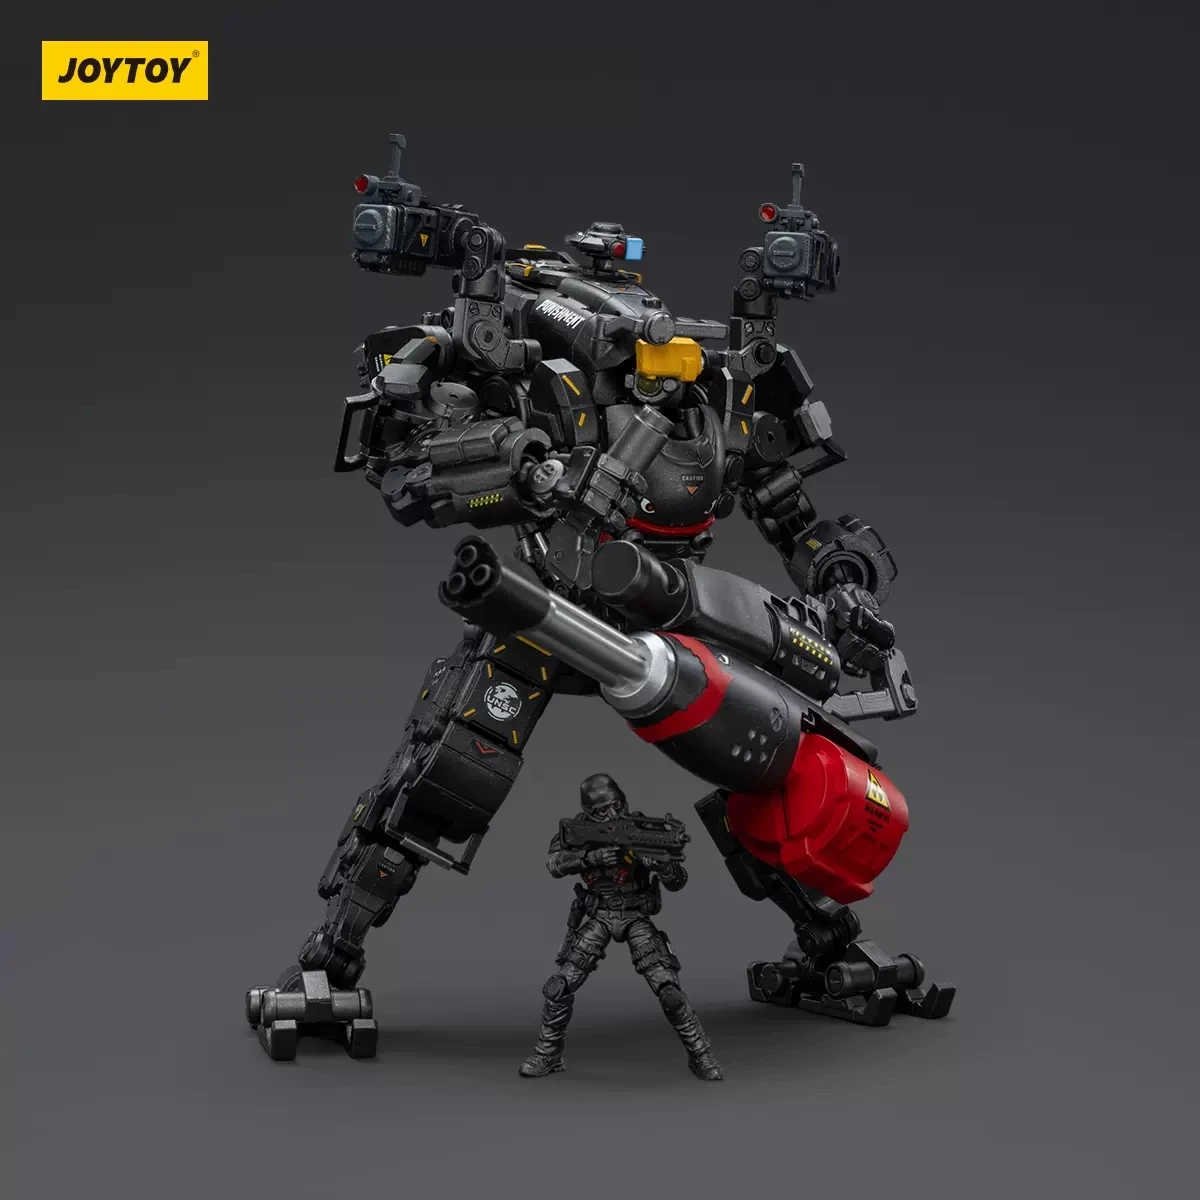 

JOYTOY 1/25 Scale Mecha NEW God of War 86-II Assault Black Model with Mini Soldier Action Figure for Fans Collection Gift